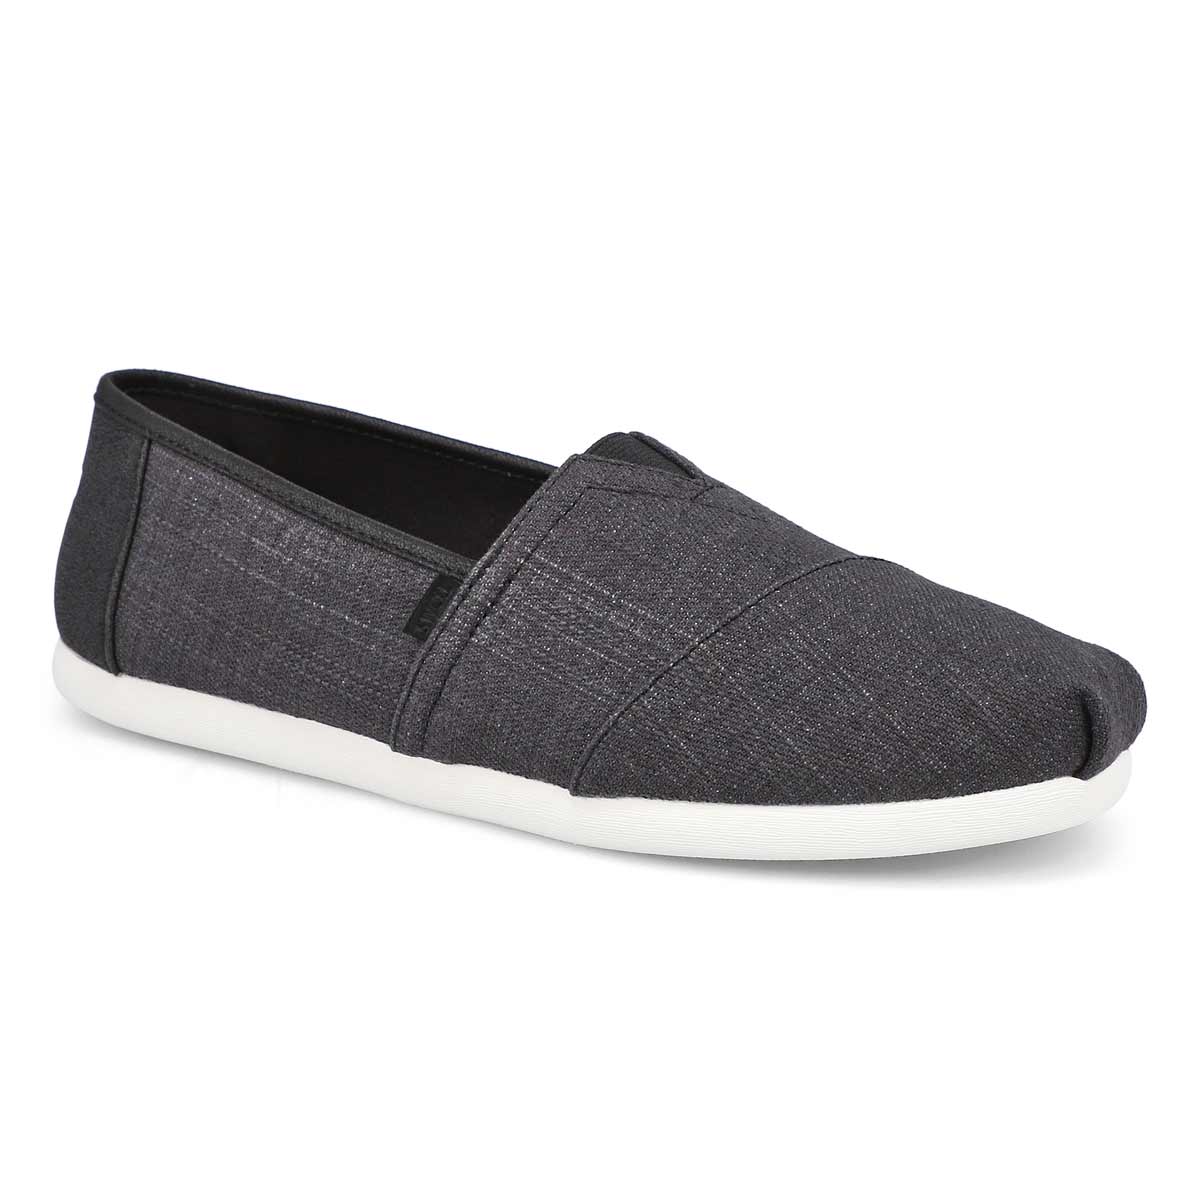 TOMS Men's Classic Casual Loafer - Ash Grey | SoftMoc.com